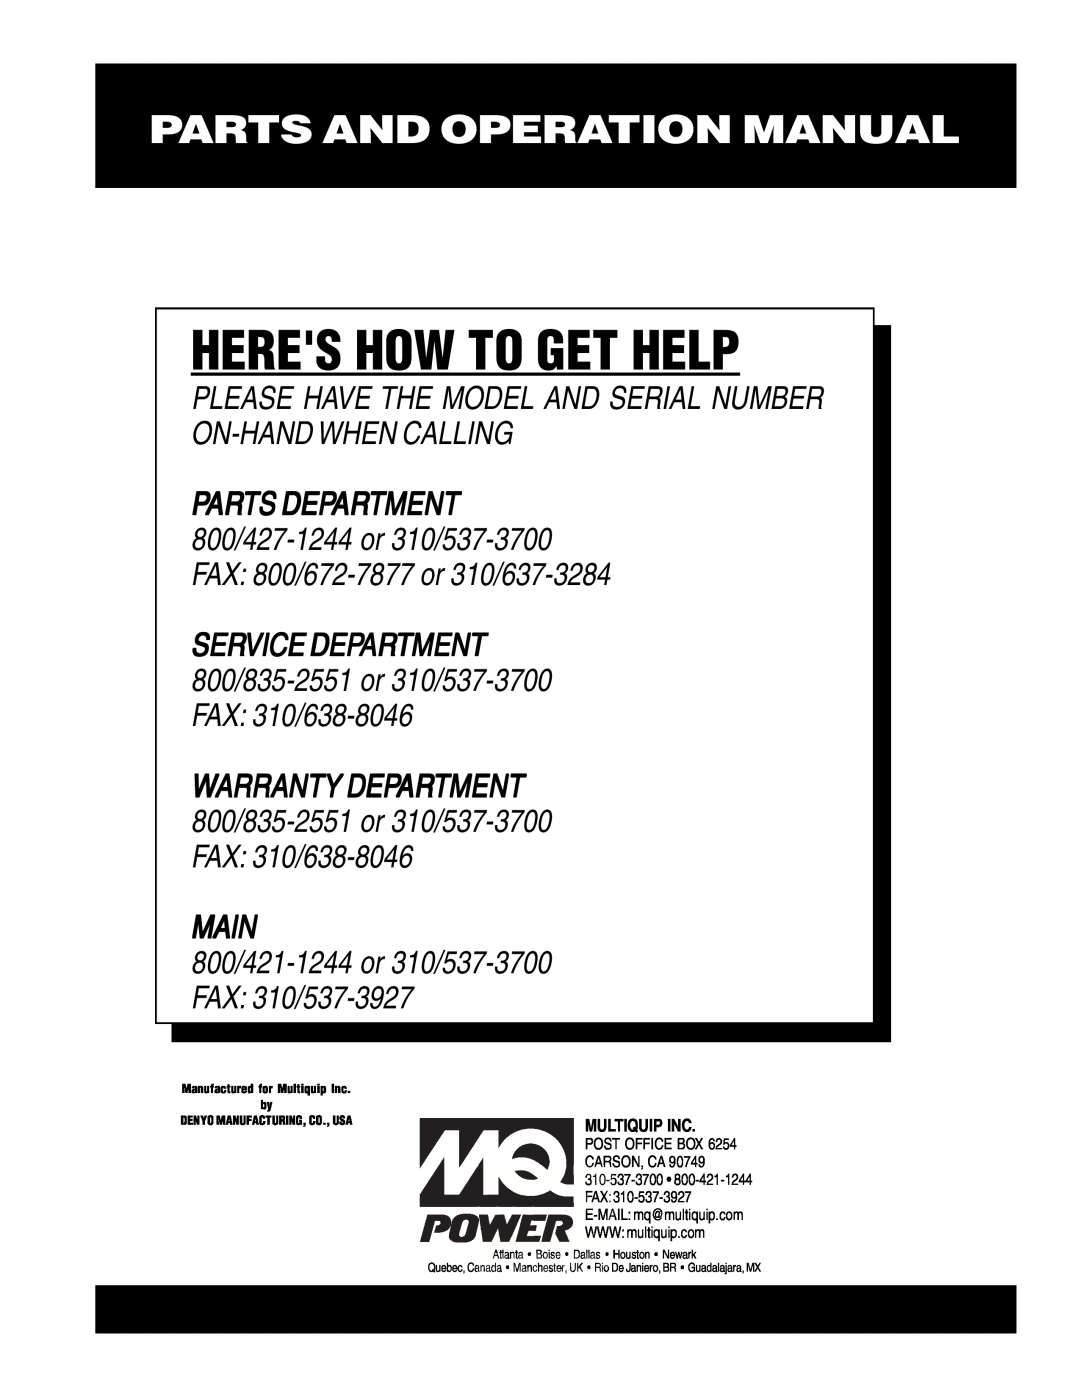 Multiquip DCA-400SPK Heres How To Get Help, Parts And Operation Manual, Main, 800/421-1244or 310/537-3700FAX: 310/537-3927 